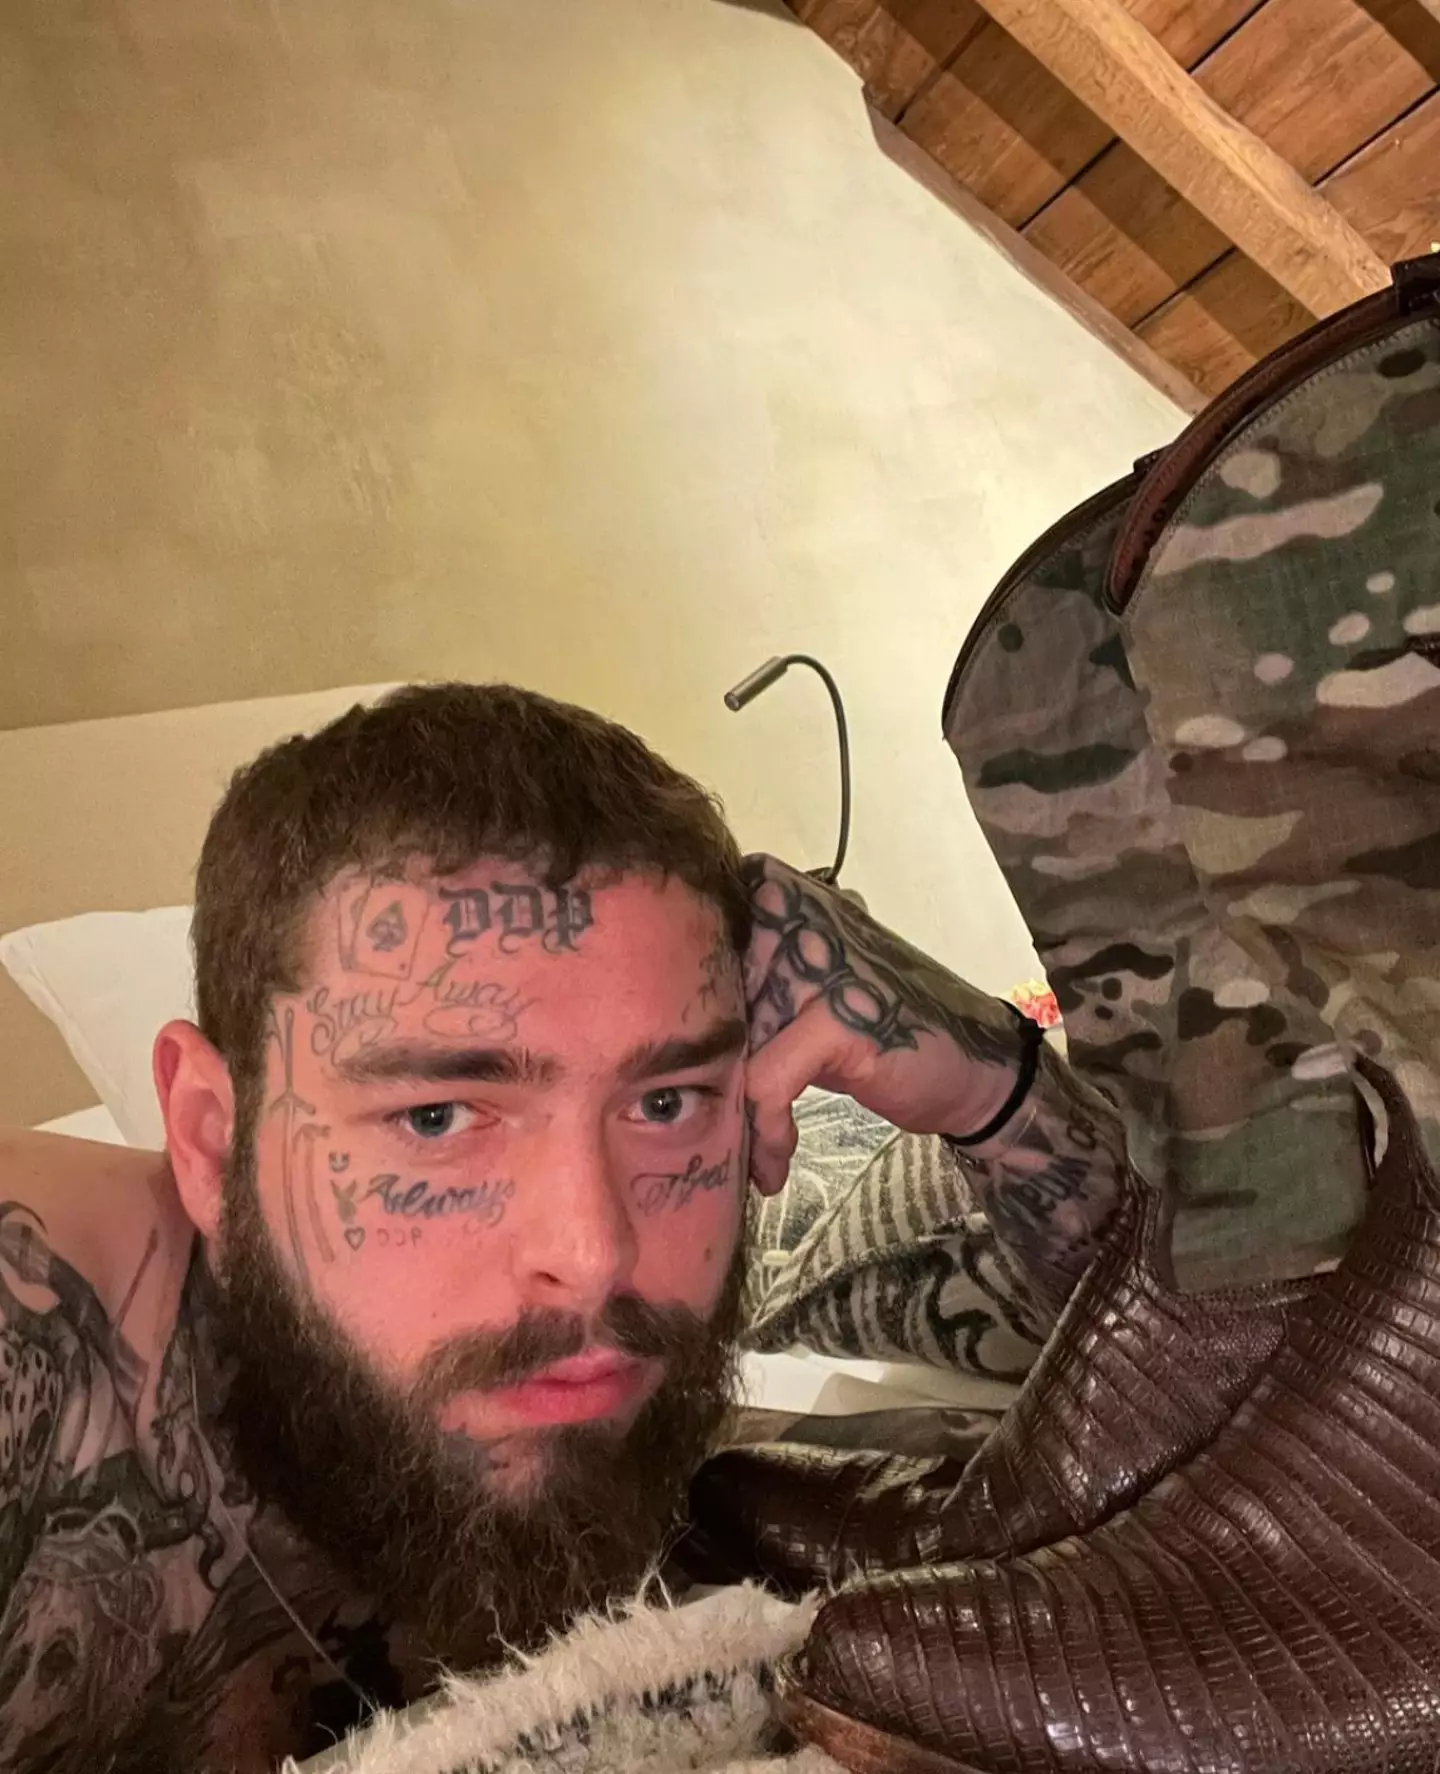 Post Malone previously denied using drugs in an Instagram post shared in April.